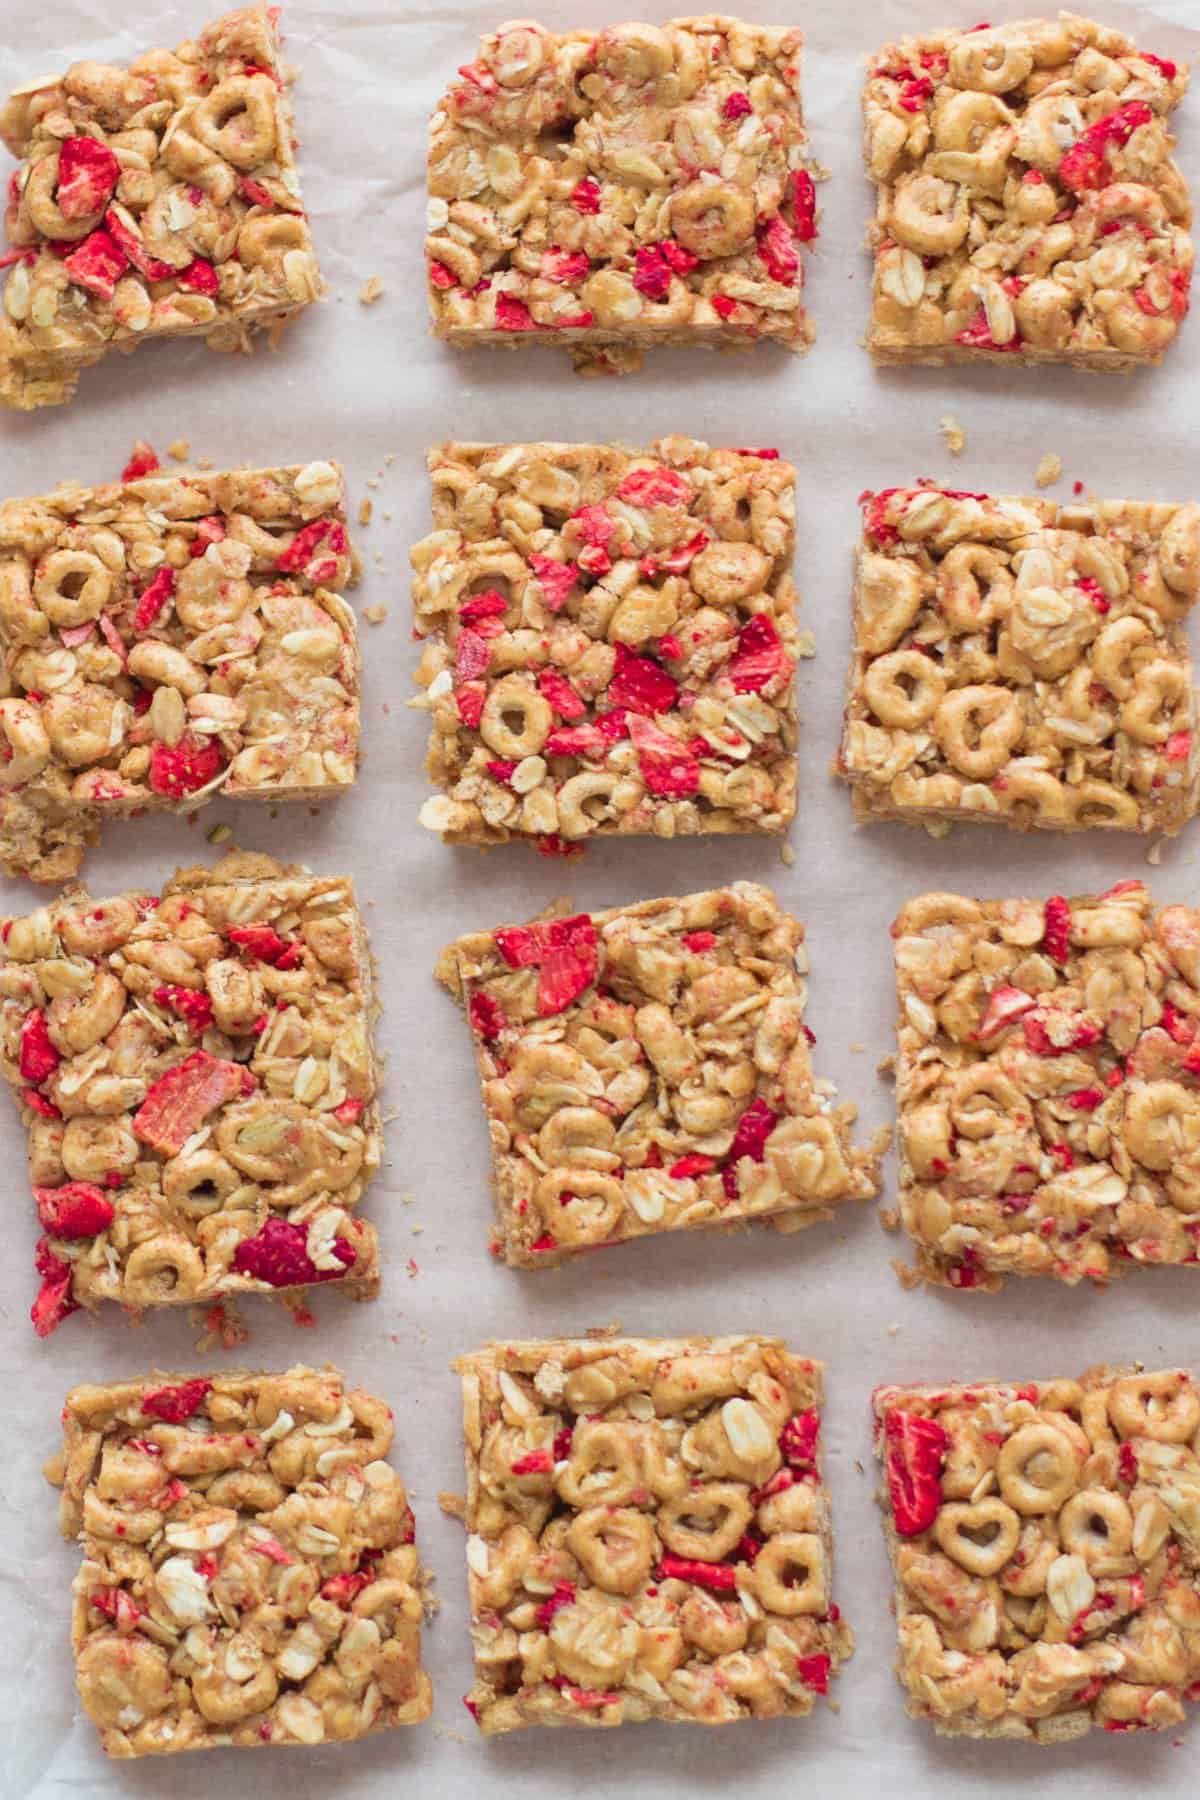 a close up shot of sliced peanut butter cereal bars with strawberries.